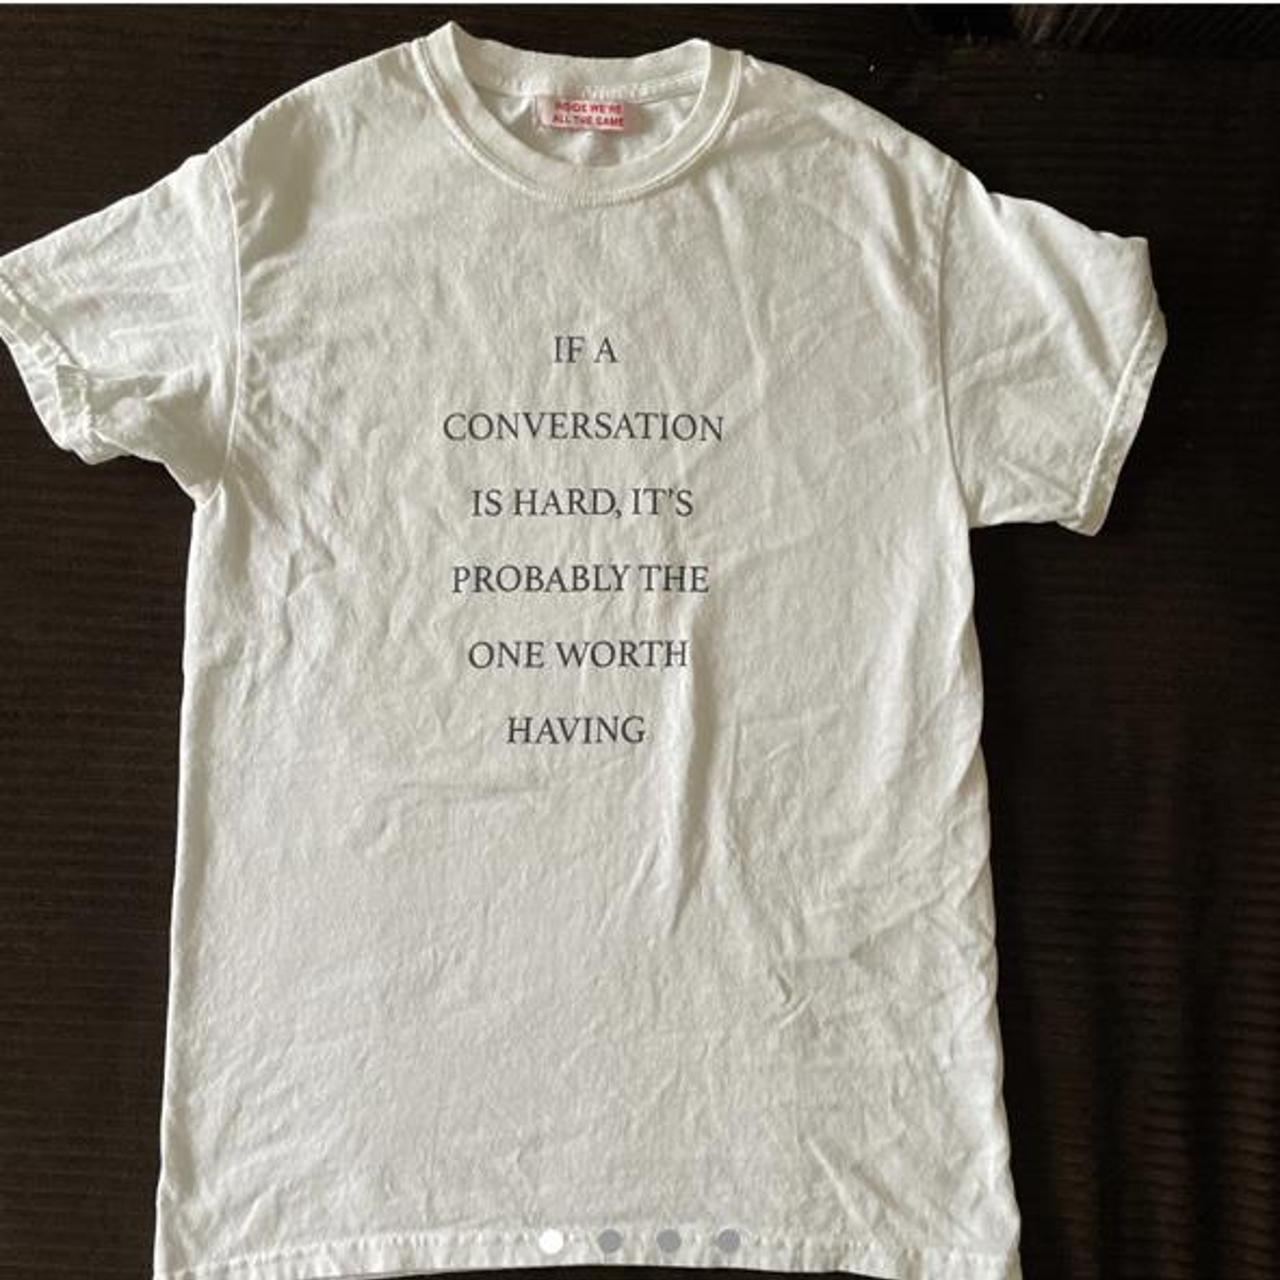 Product Image 1 - #WNRS conversation t-shirt
this is a